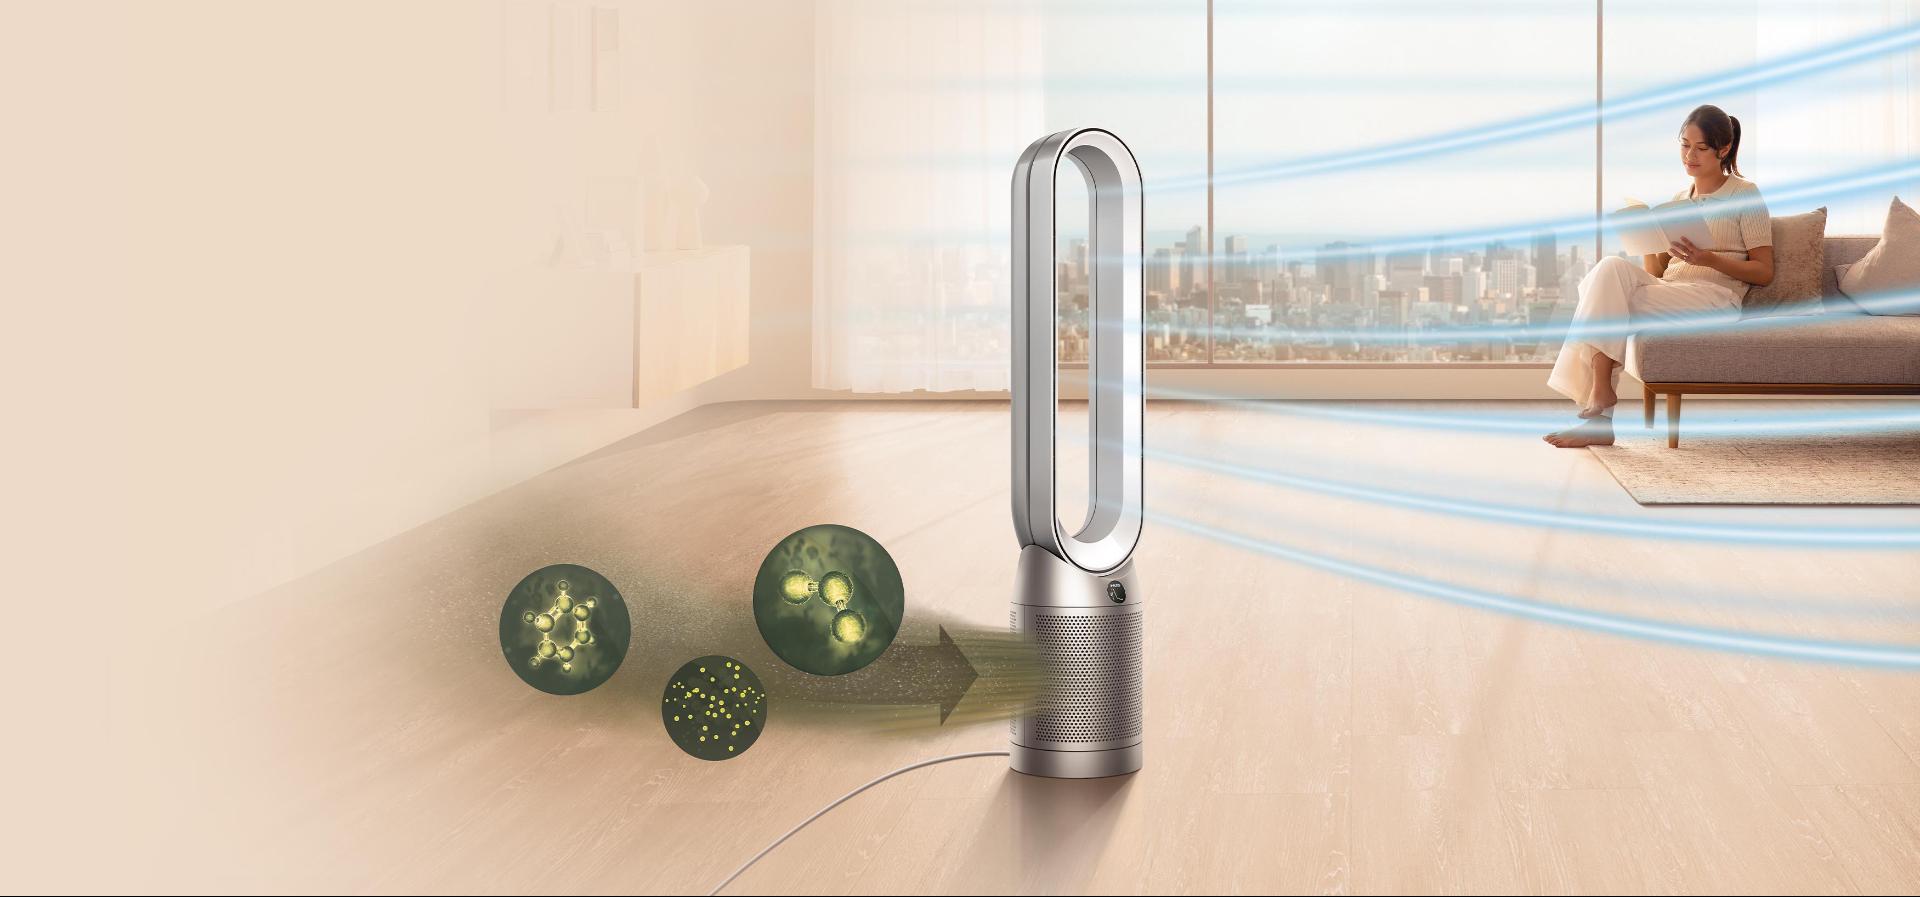 Dyson purifier drawing in airborne particles and expelling a stream of purified air